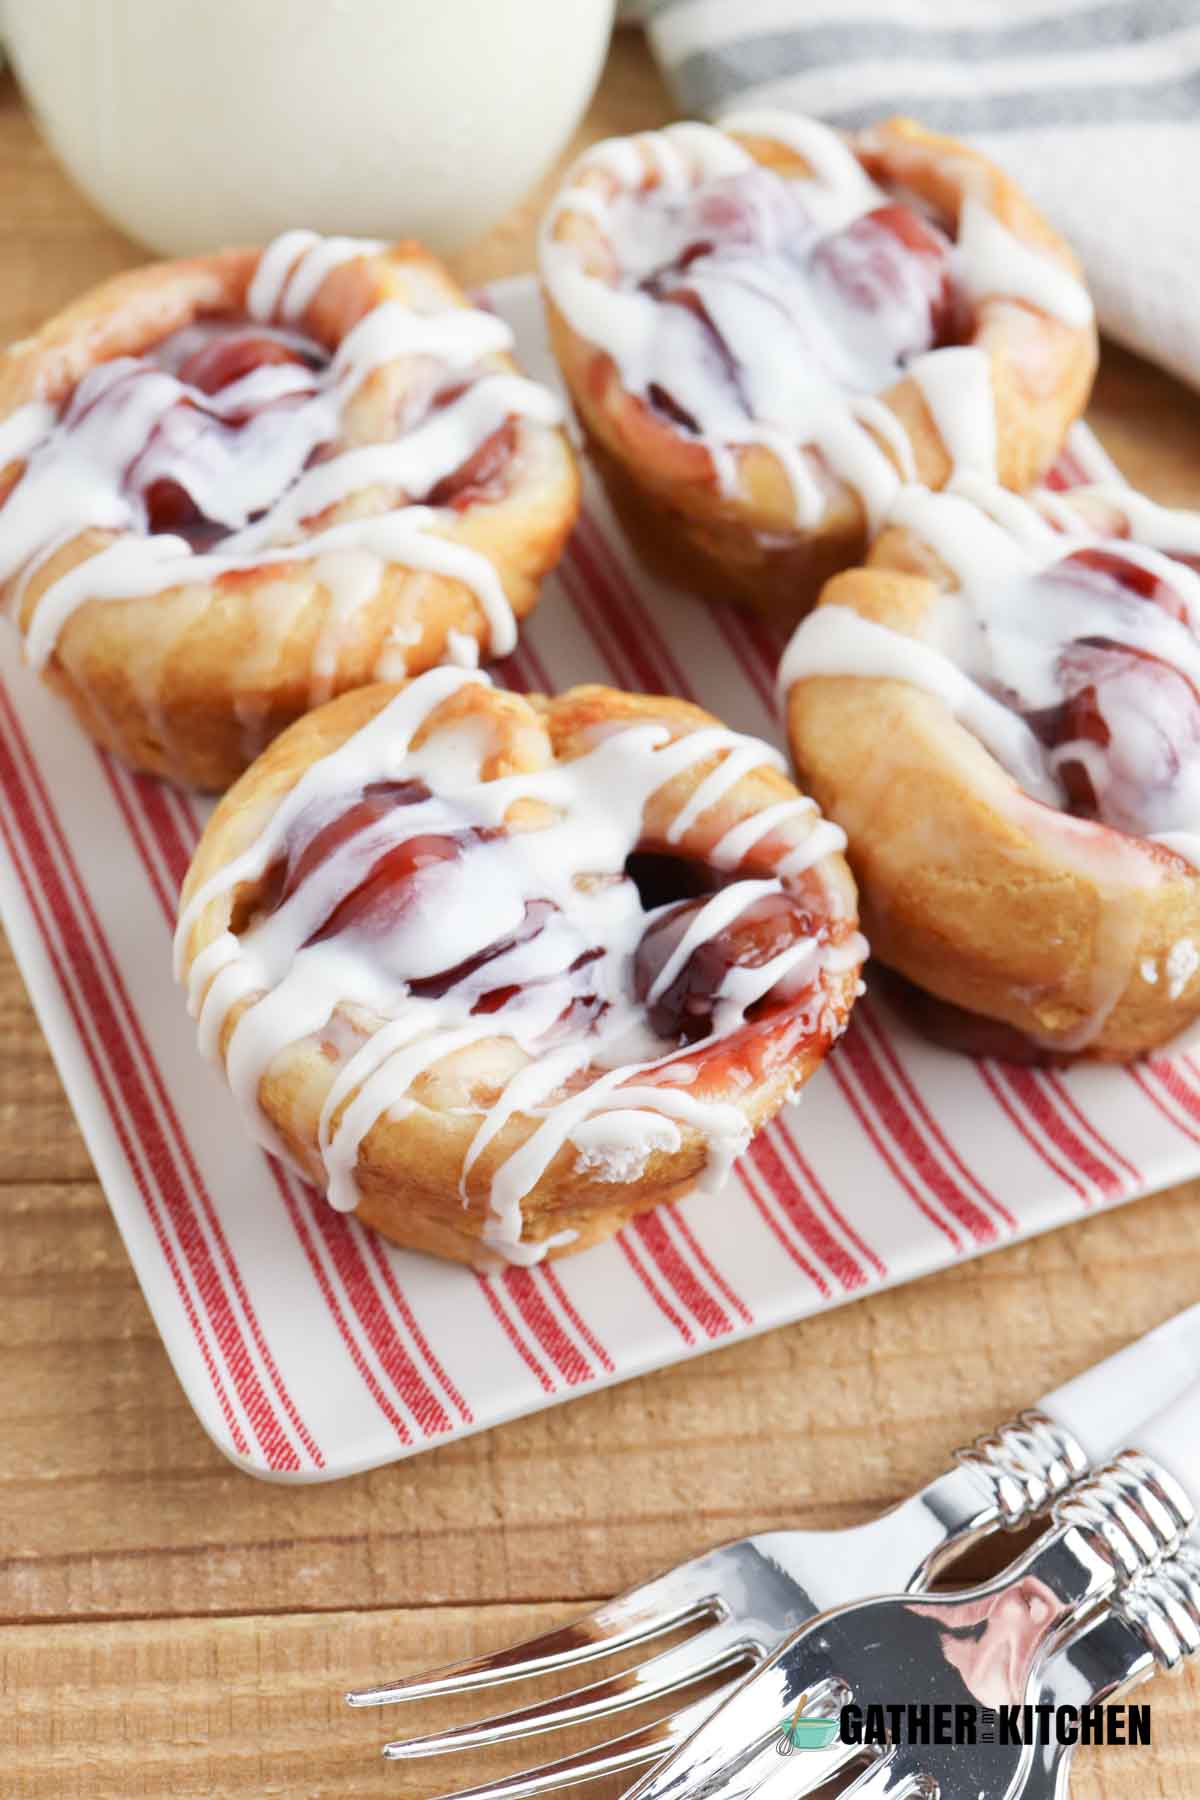 Cherry Danish muffins on a plate.